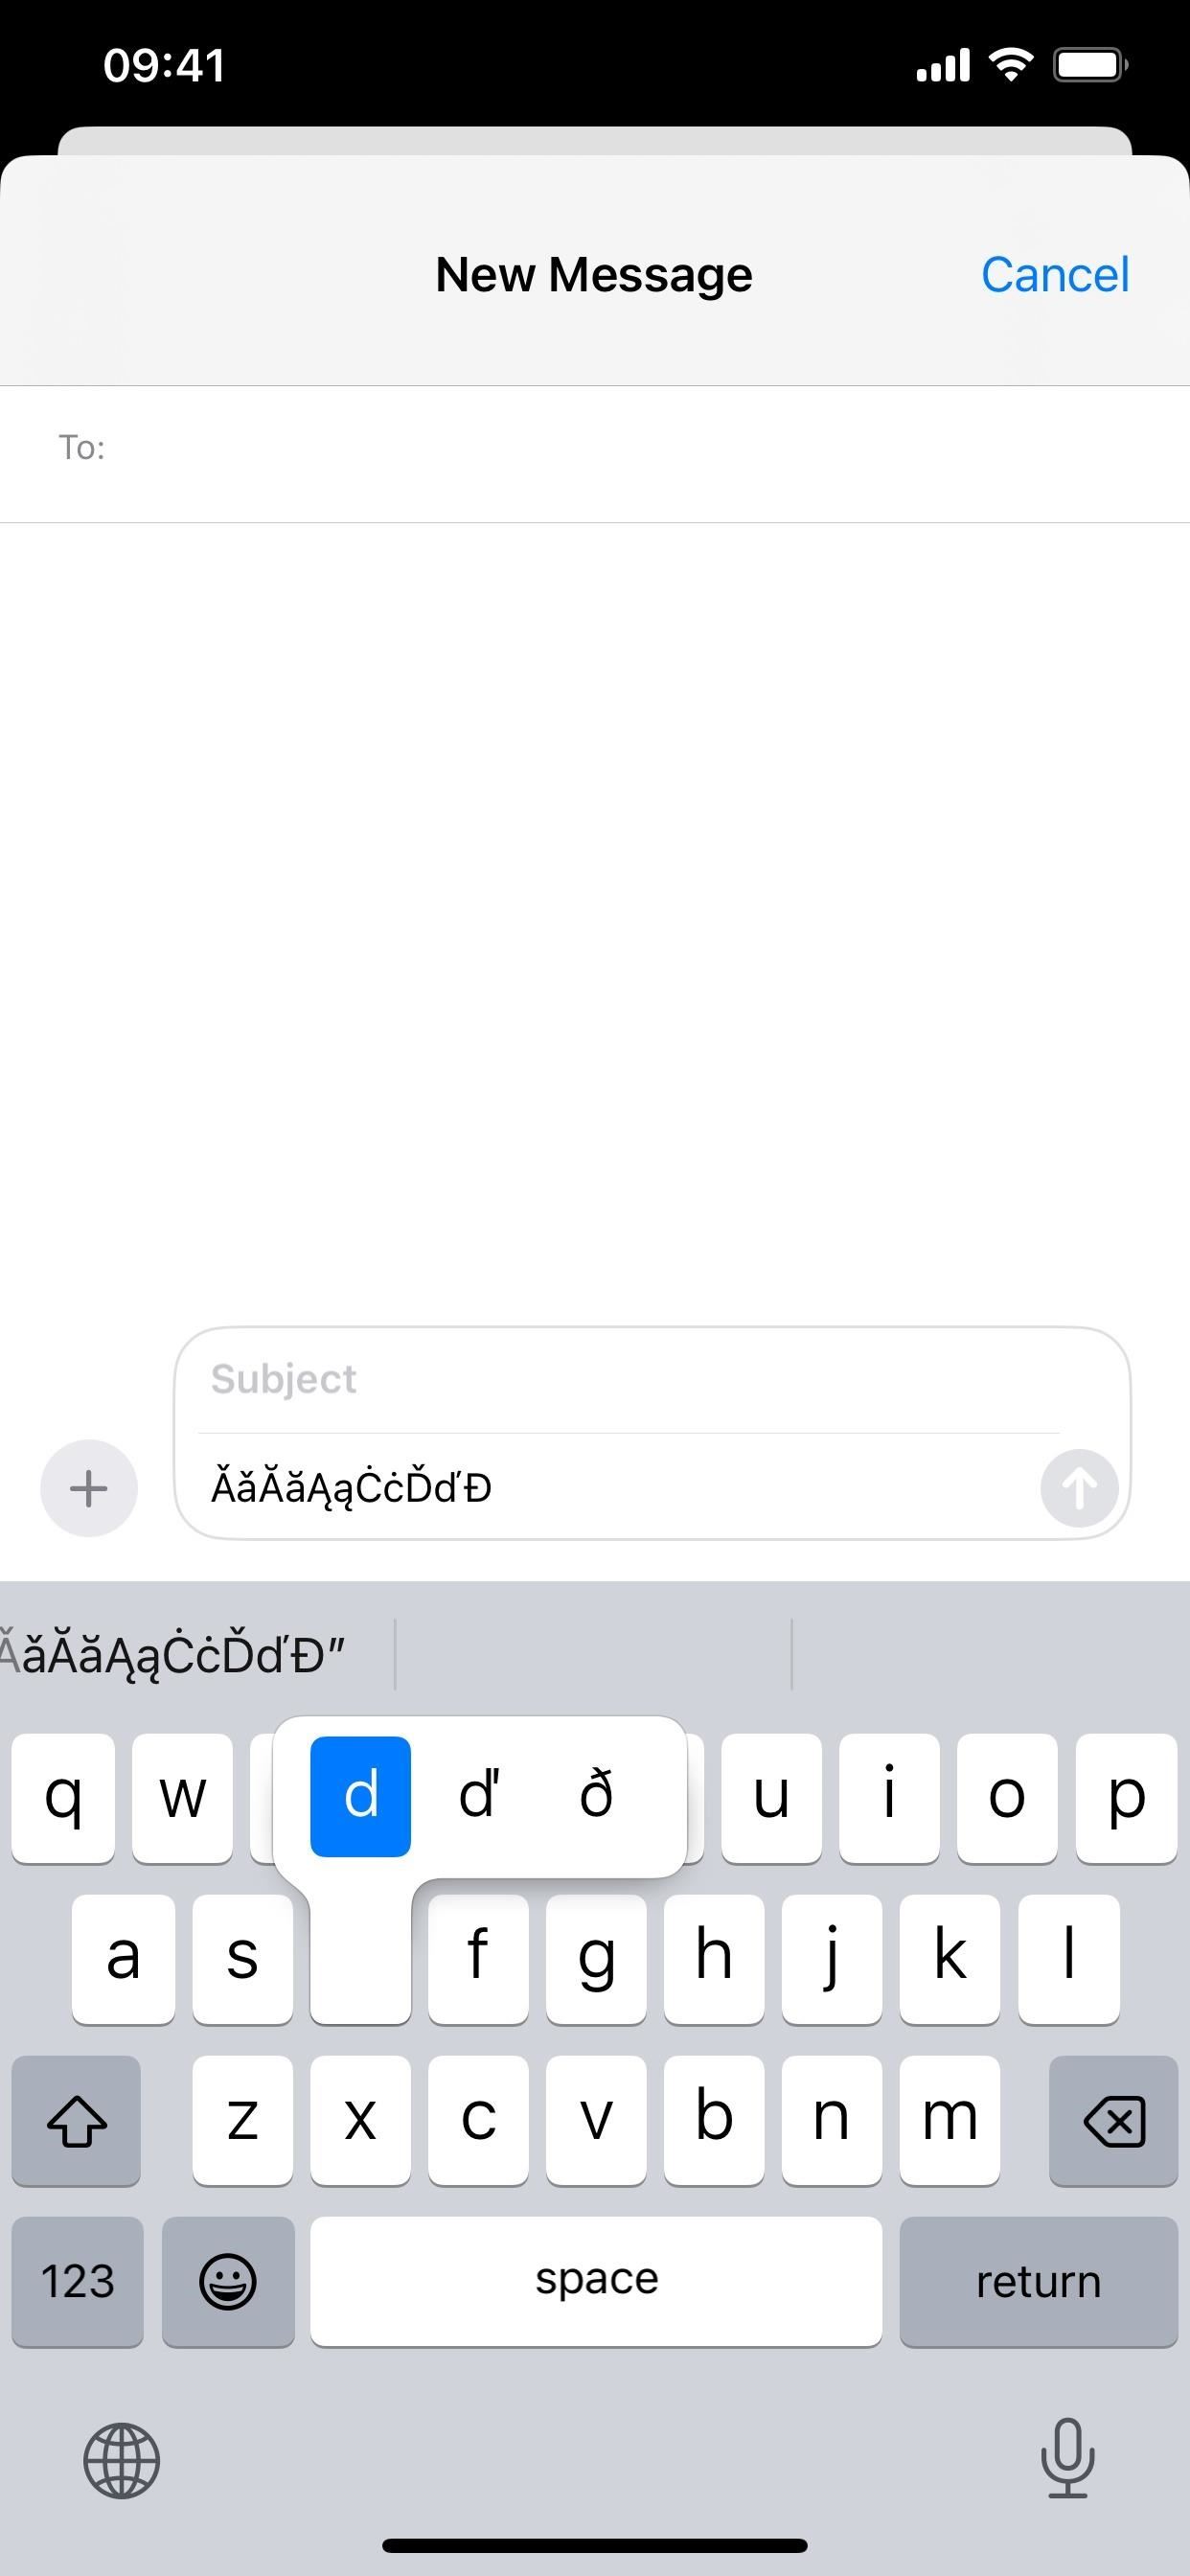 71 More Special Characters Are Hiding Within Your Keyboard on iOS 17 and iPadOS 17 — Here's What's New